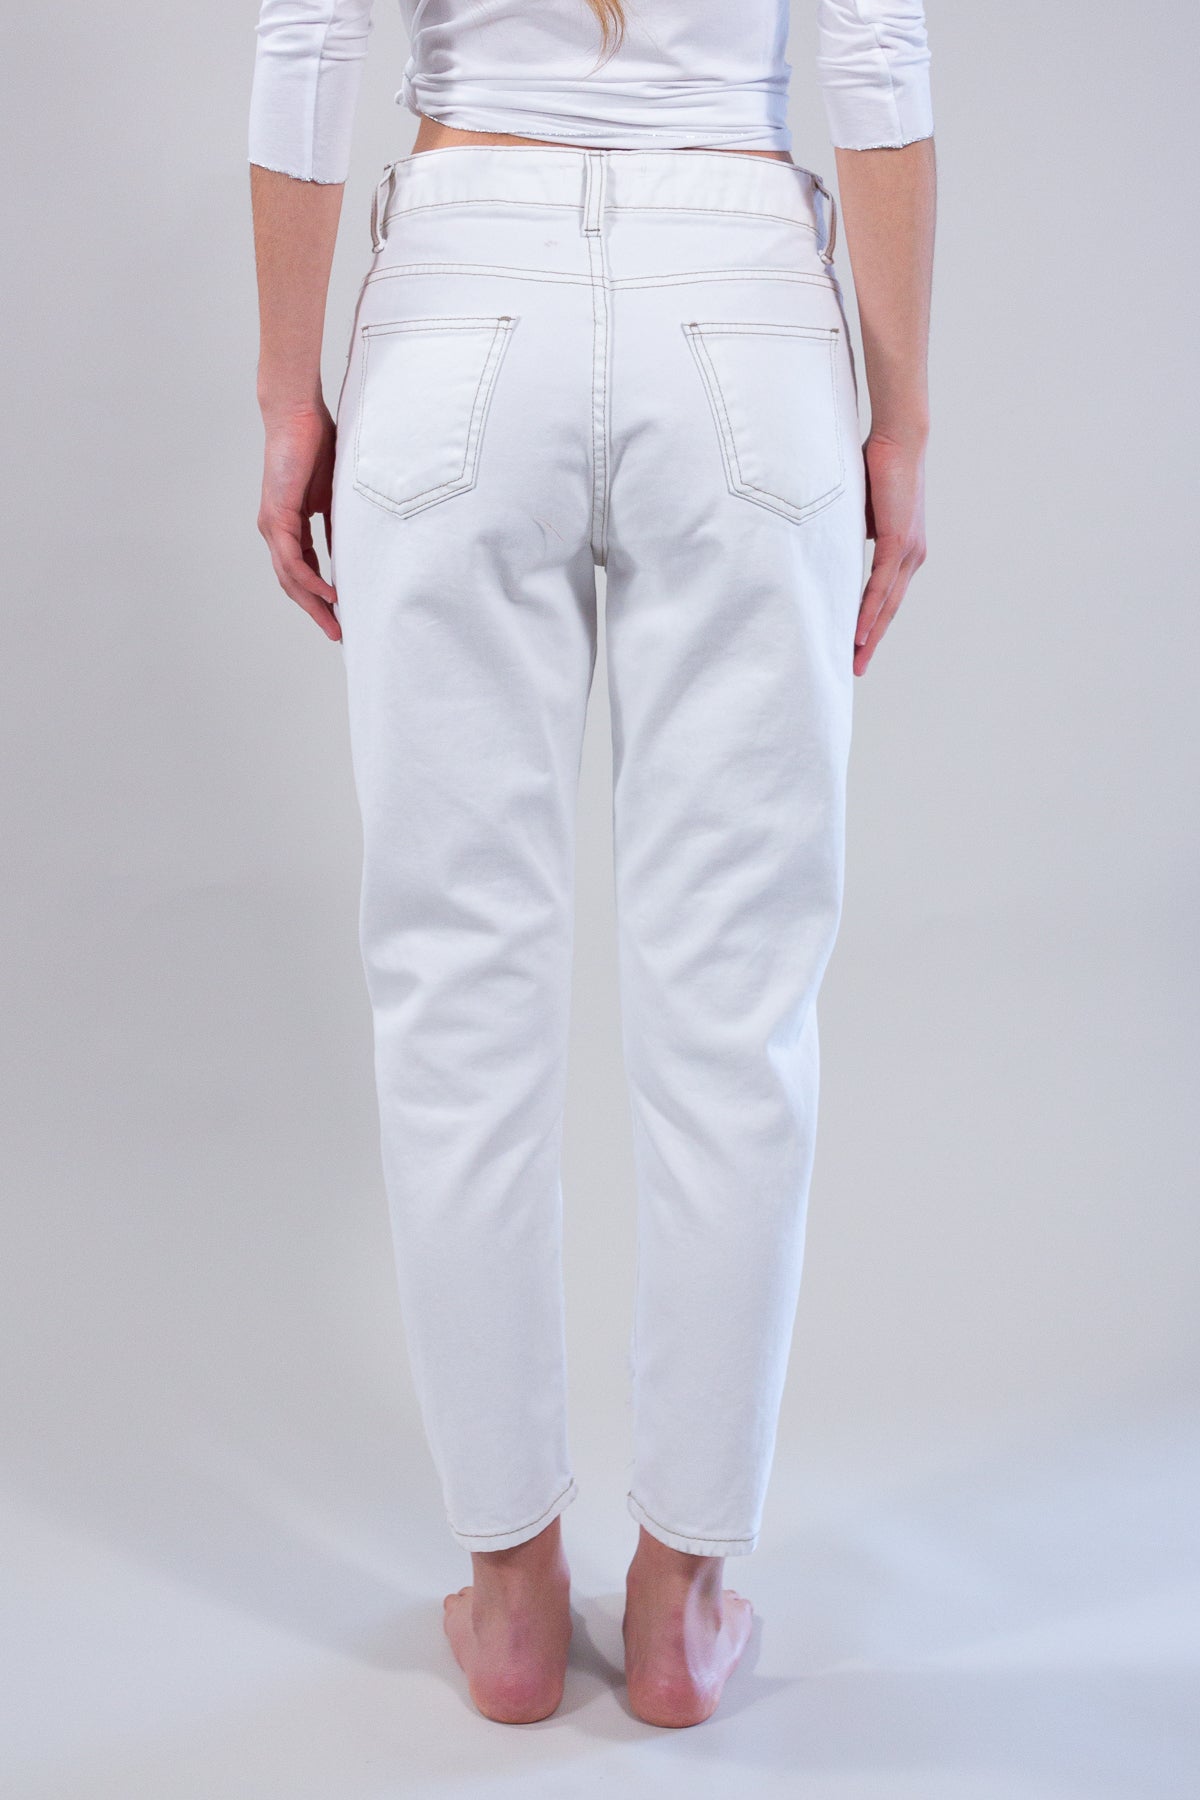 JEANS BIANCO ROTTURE